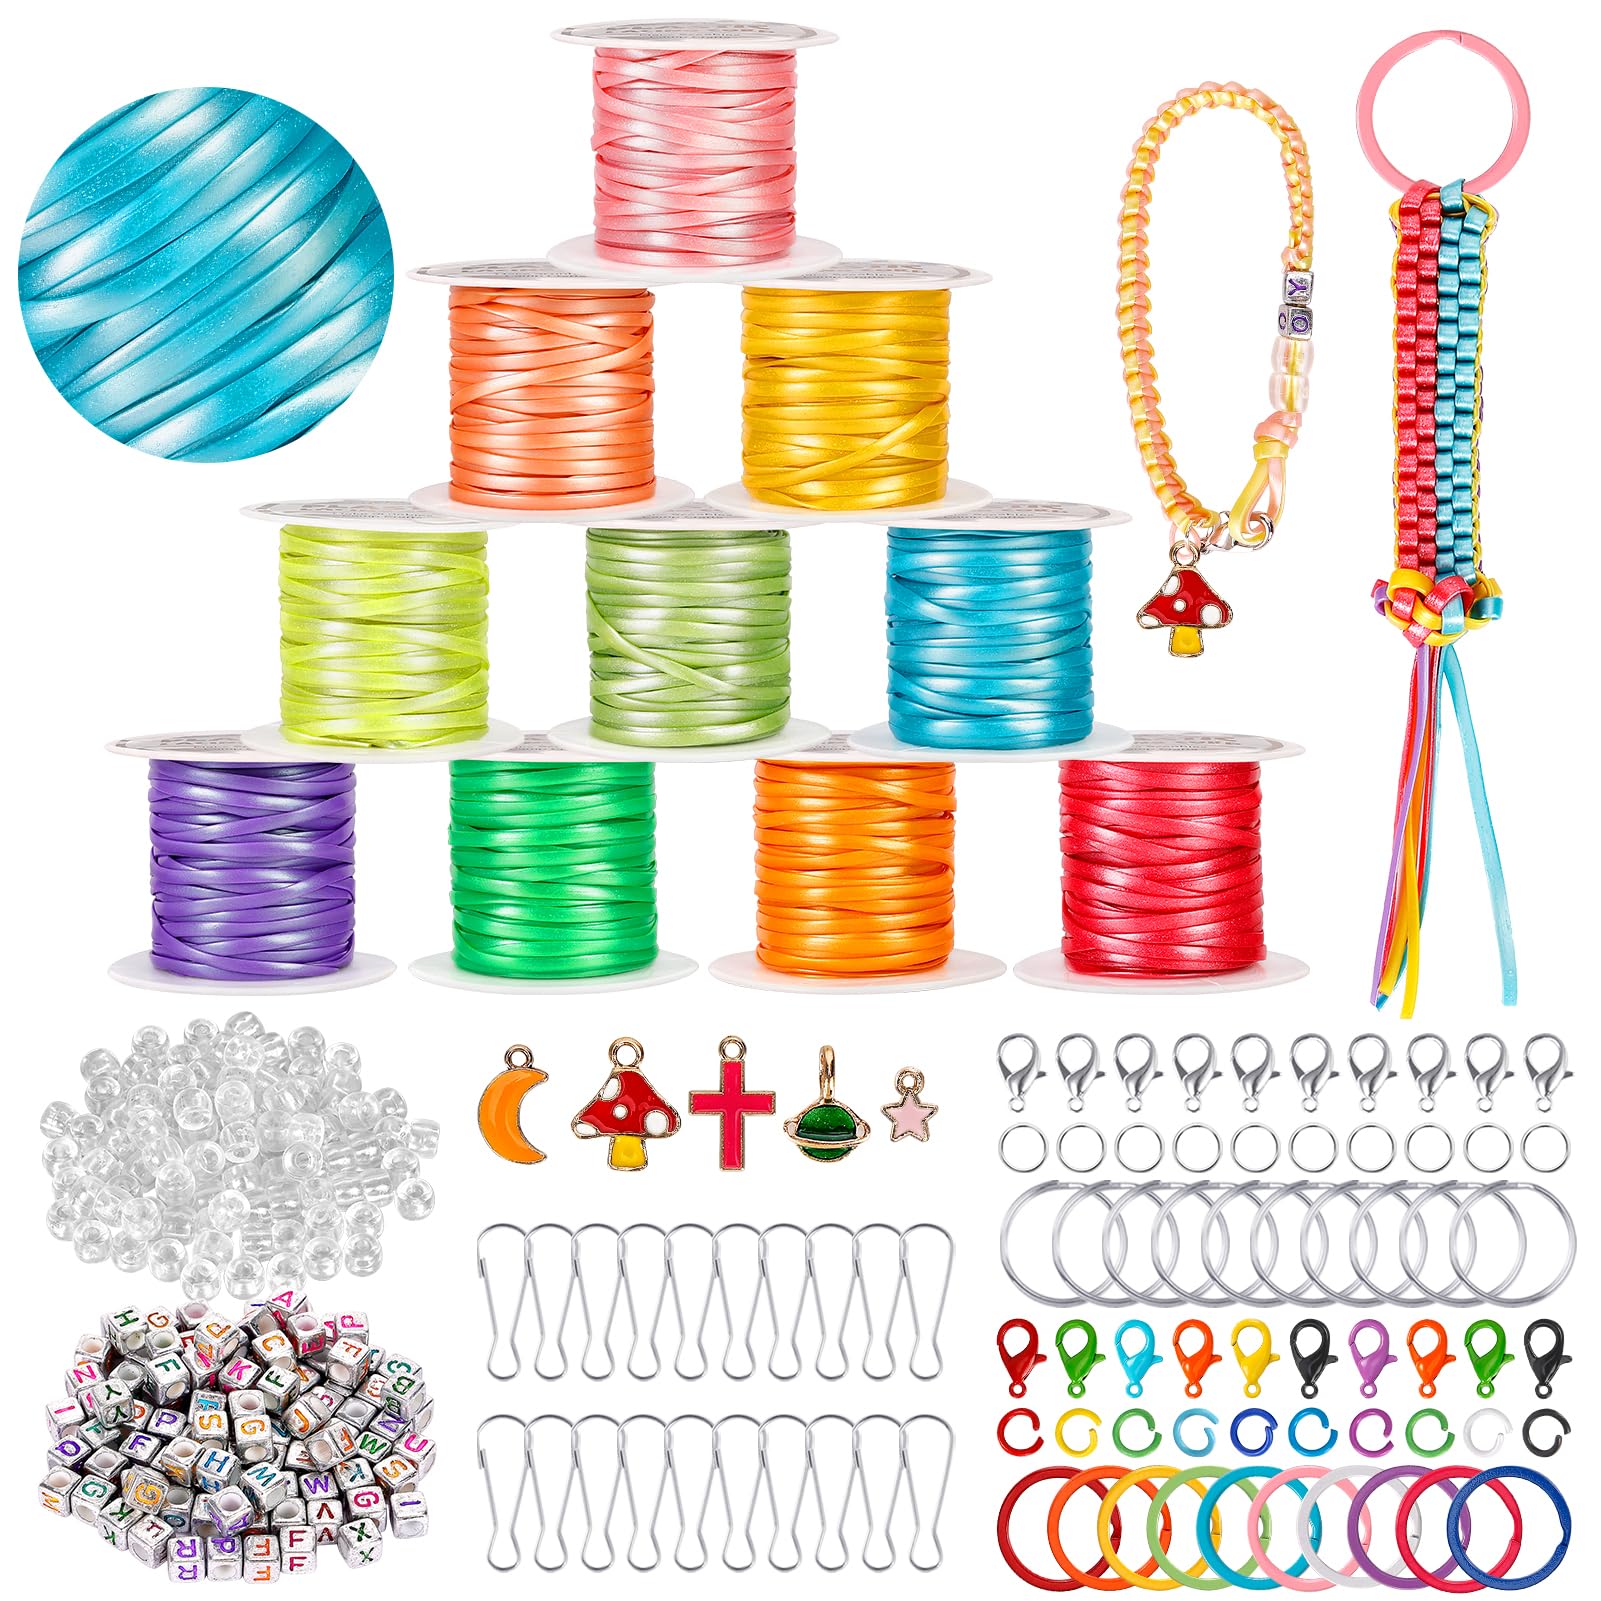  PP OPOUNT Adjustable Bead Loom Kit, Wood Loom Beading Supplies  with Detailed Instructions, Practical Jewelry Making Accessories, Beading  Loom Kits for Adults Jewelry Making Bracelets Belts